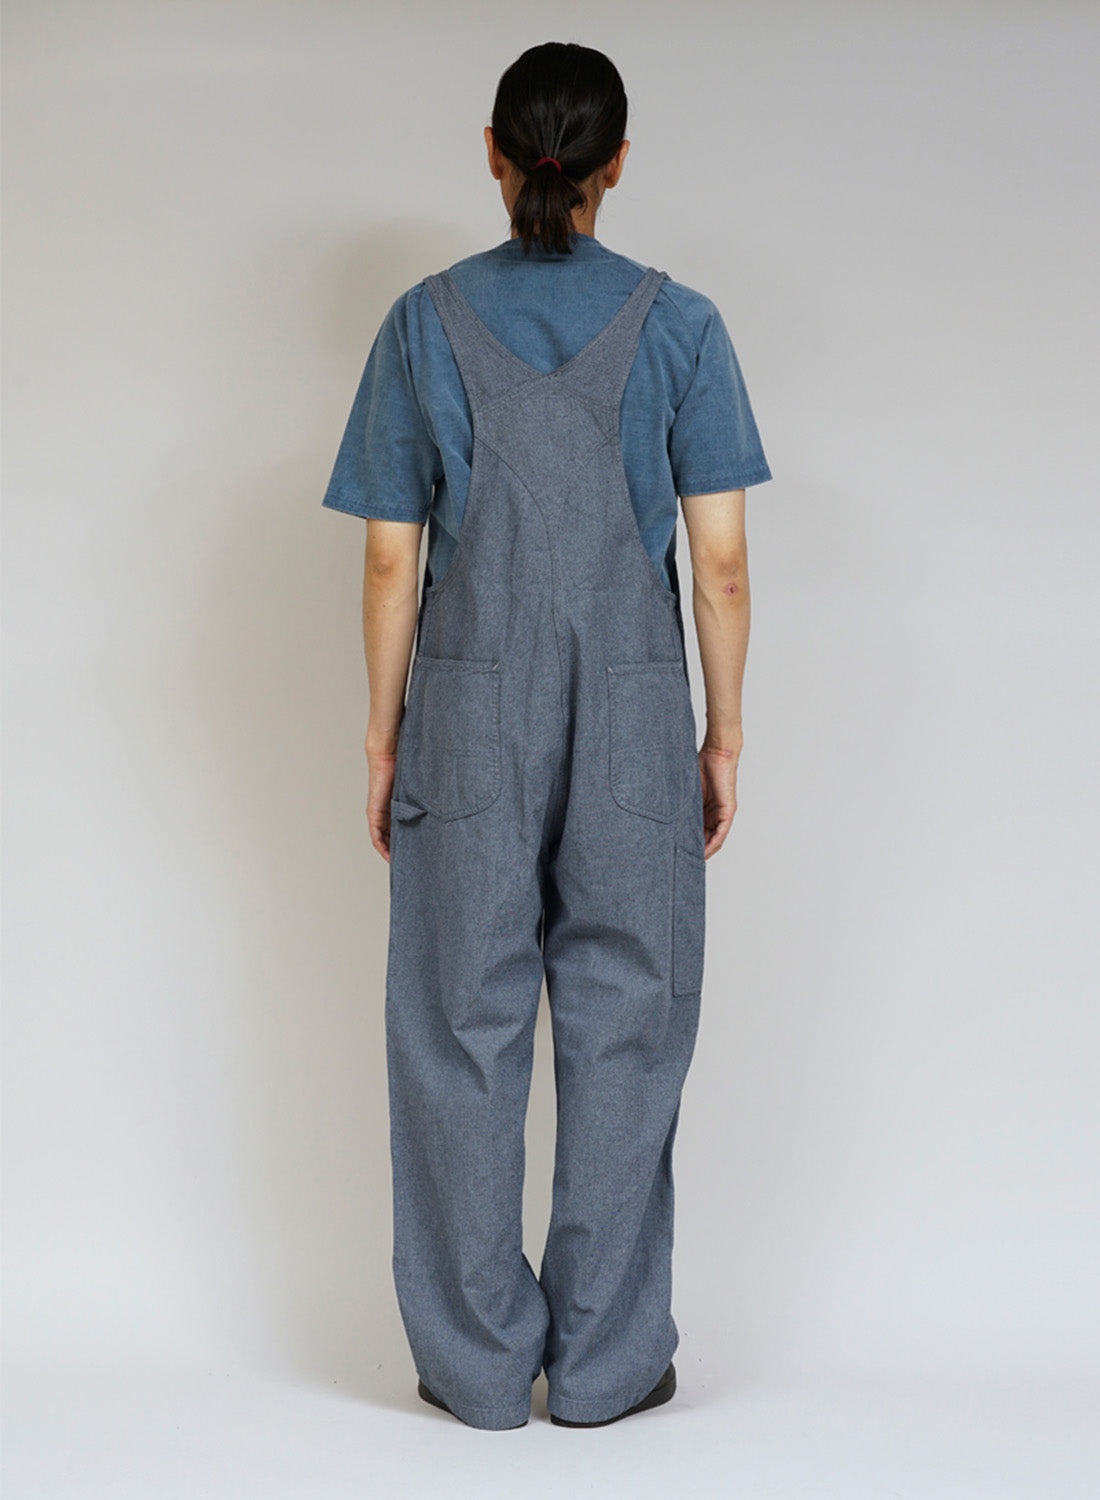 New Dungaree Broken Twill in Washed Blue - 4